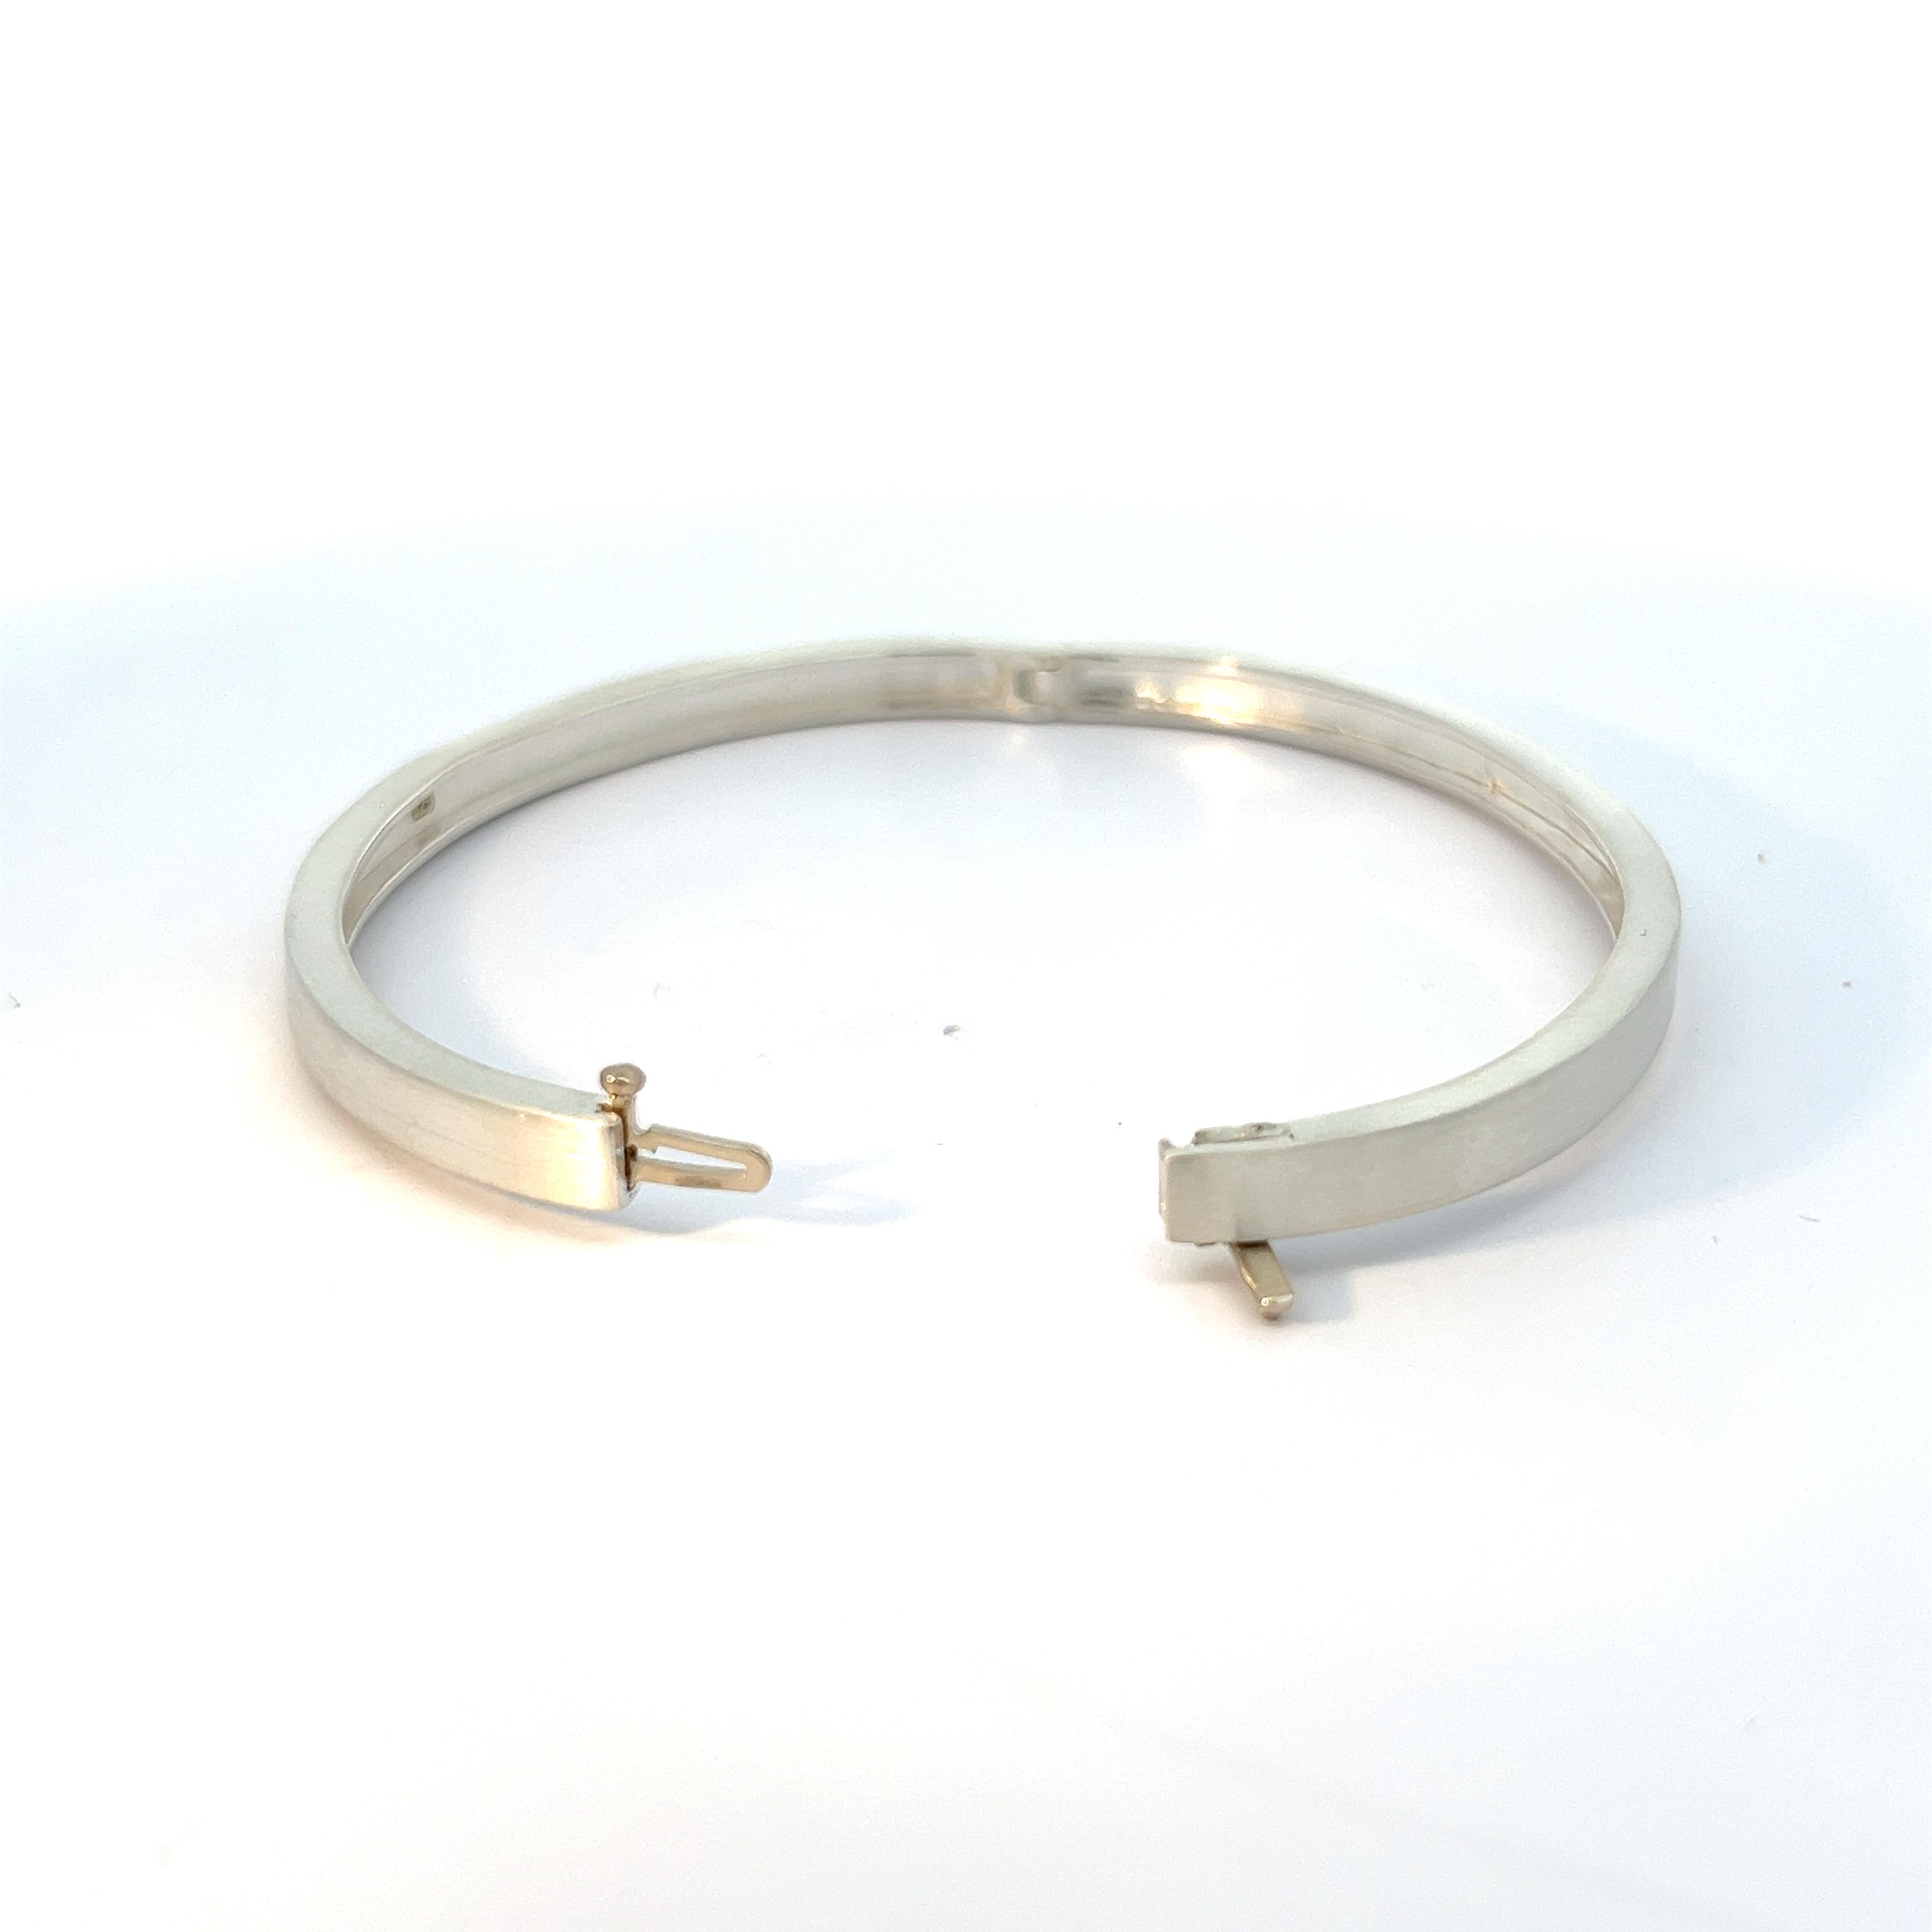 Indulge in understated luxury with this distinguished men's bangle bracelet, meticulously crafted in gleaming sterling silver. The brushed finish lends a subtle yet sophisticated texture to the surface, adding depth and character to this timeless